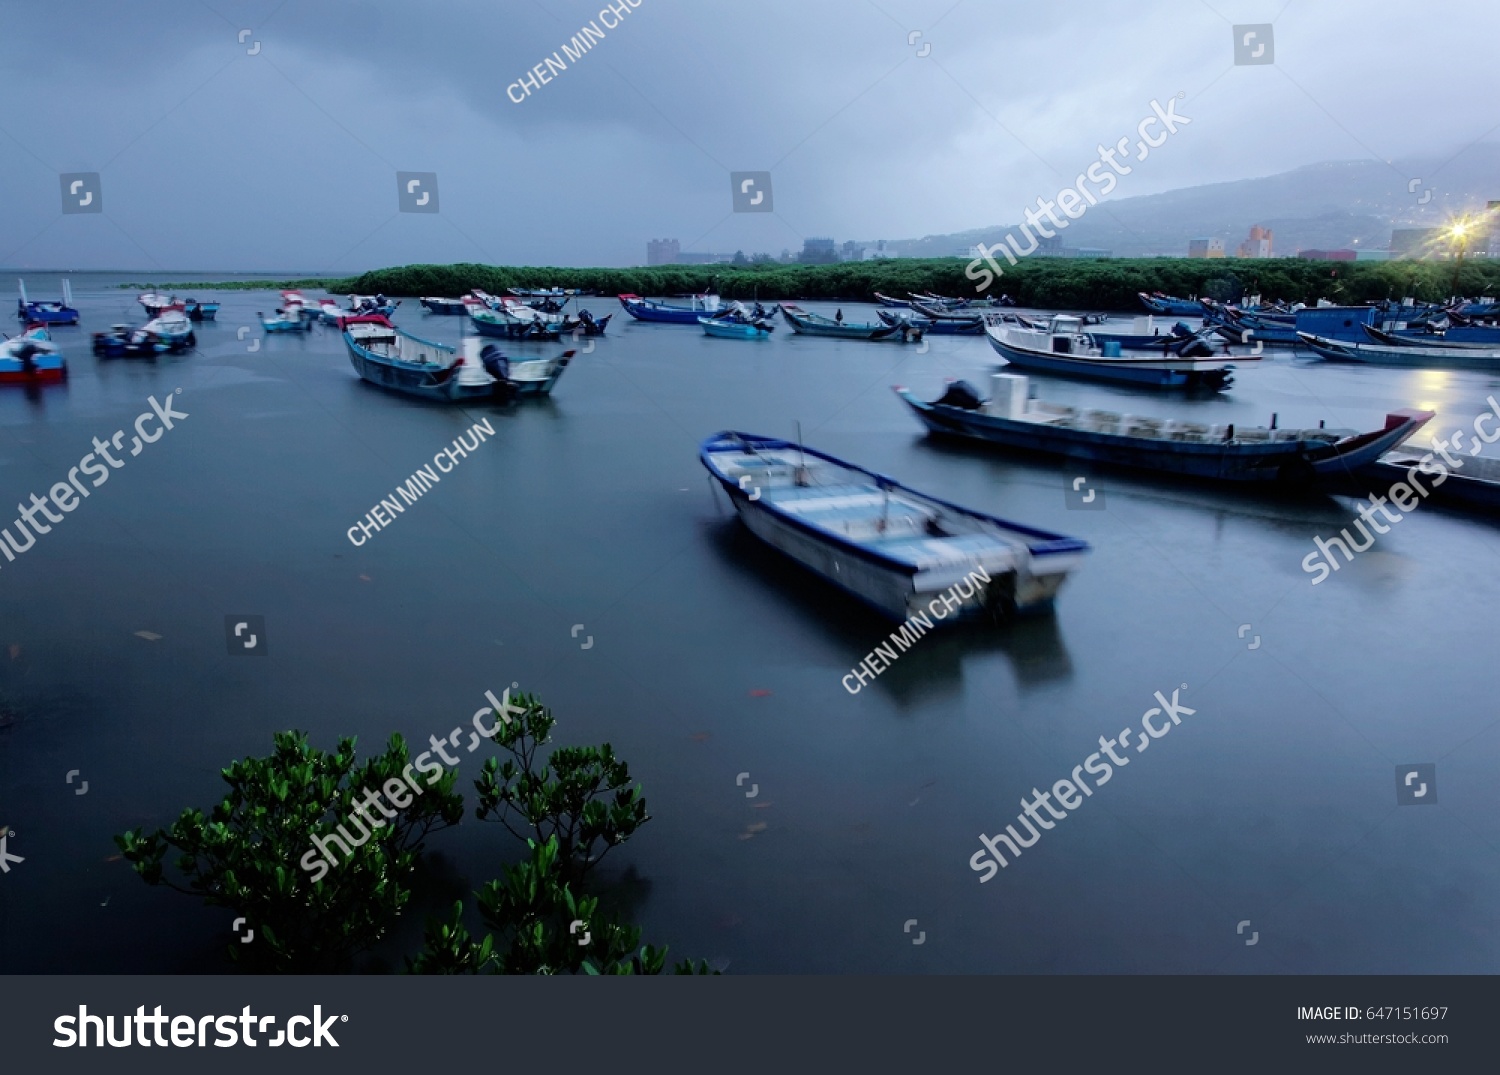 Morning scenery of Tamsui River with motor boats parking on the tranquil water and mangroves in the foreground under moody cloudy sky in Taipei Taiwan #647151697